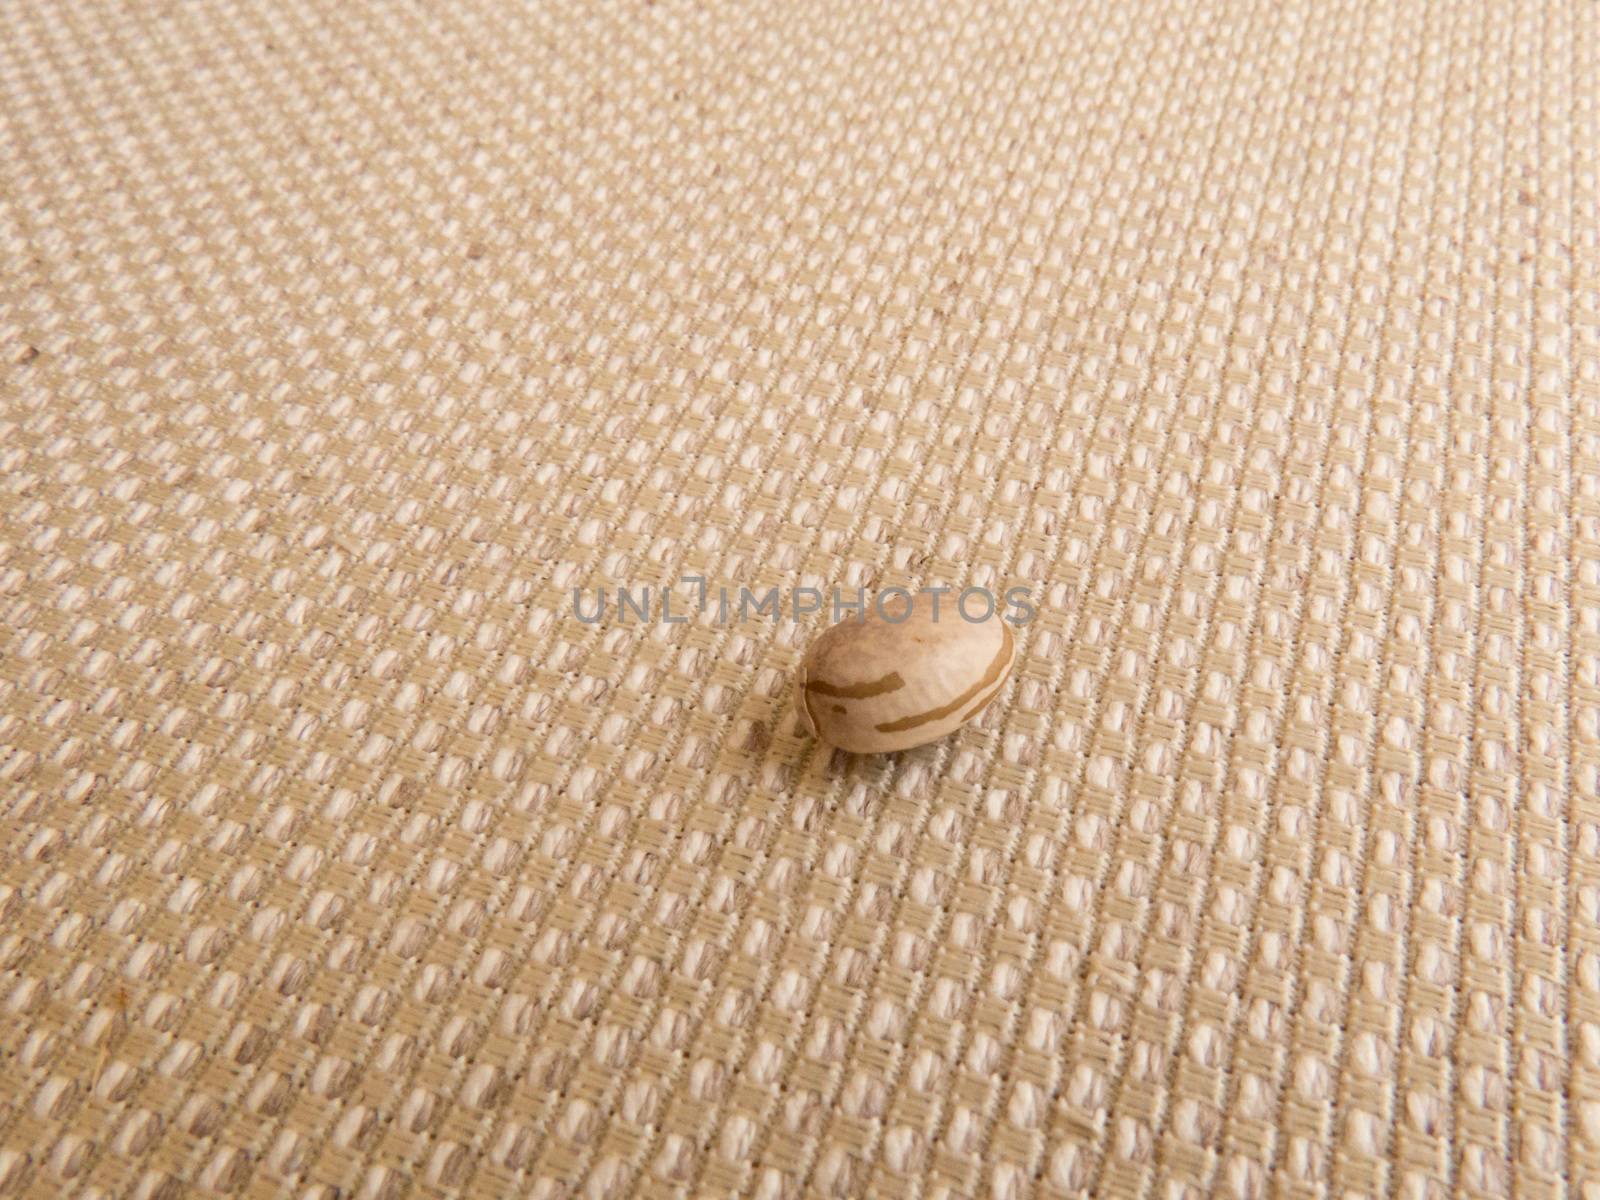 A grain of carioca beans isolated on light colored raw fabric.